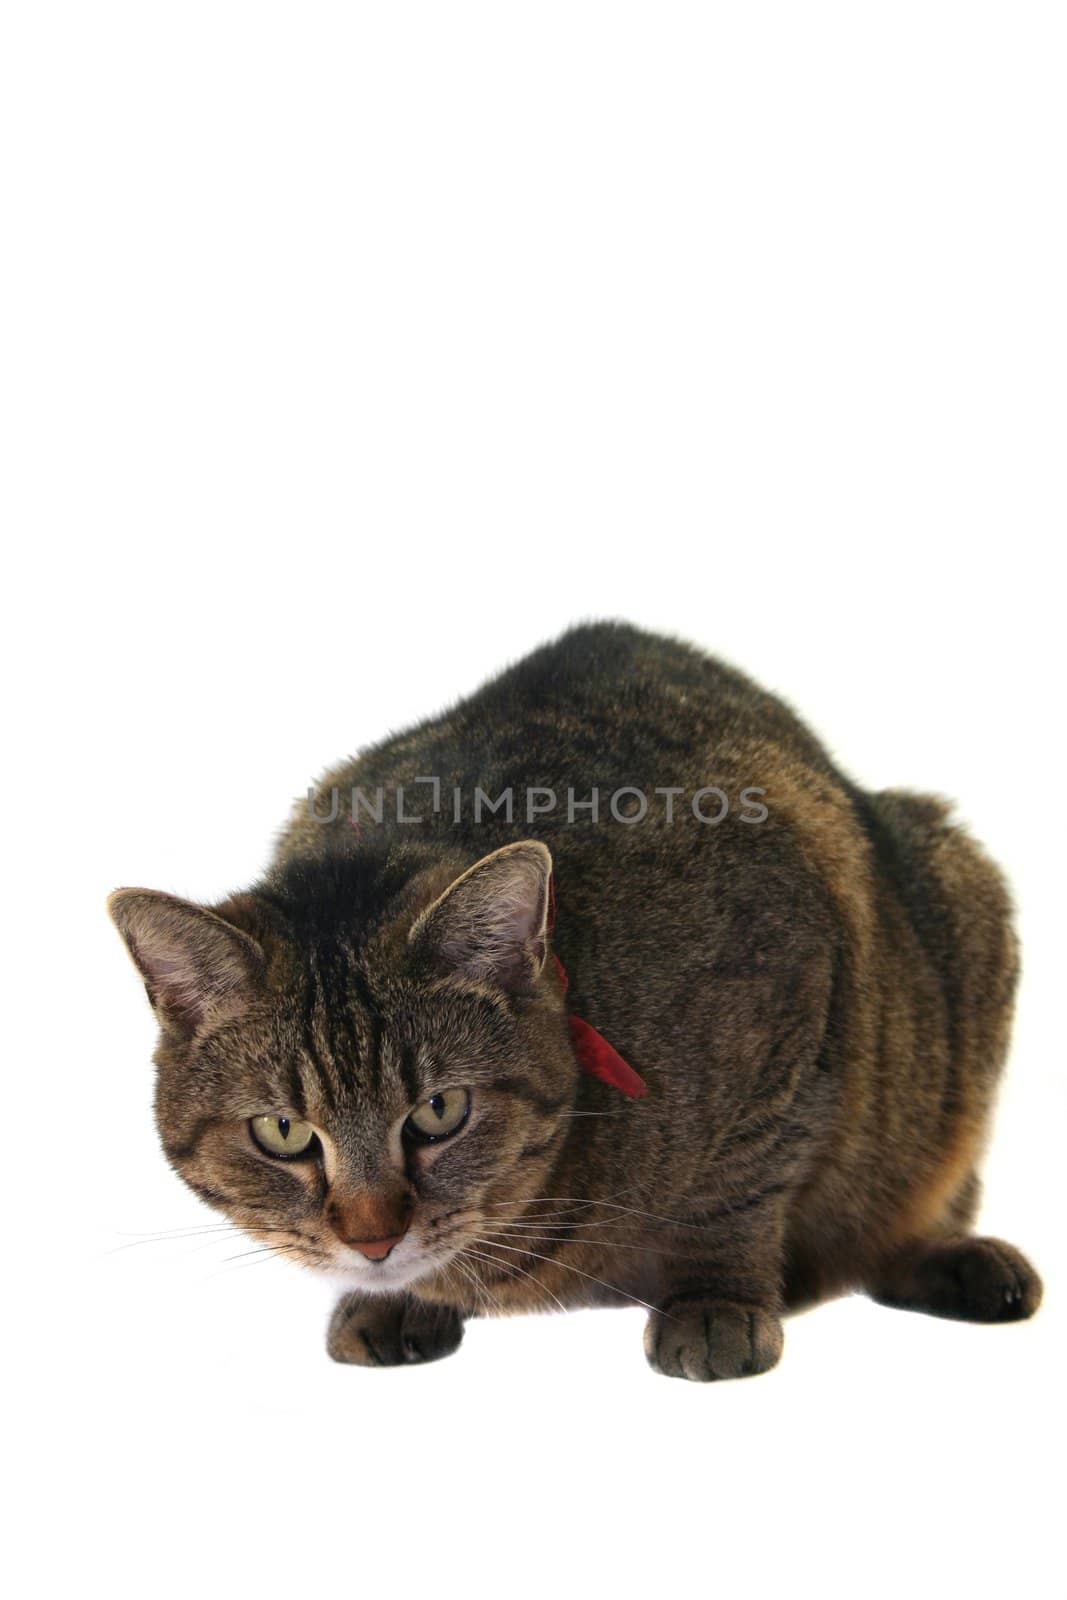 Cat with forward-facing view